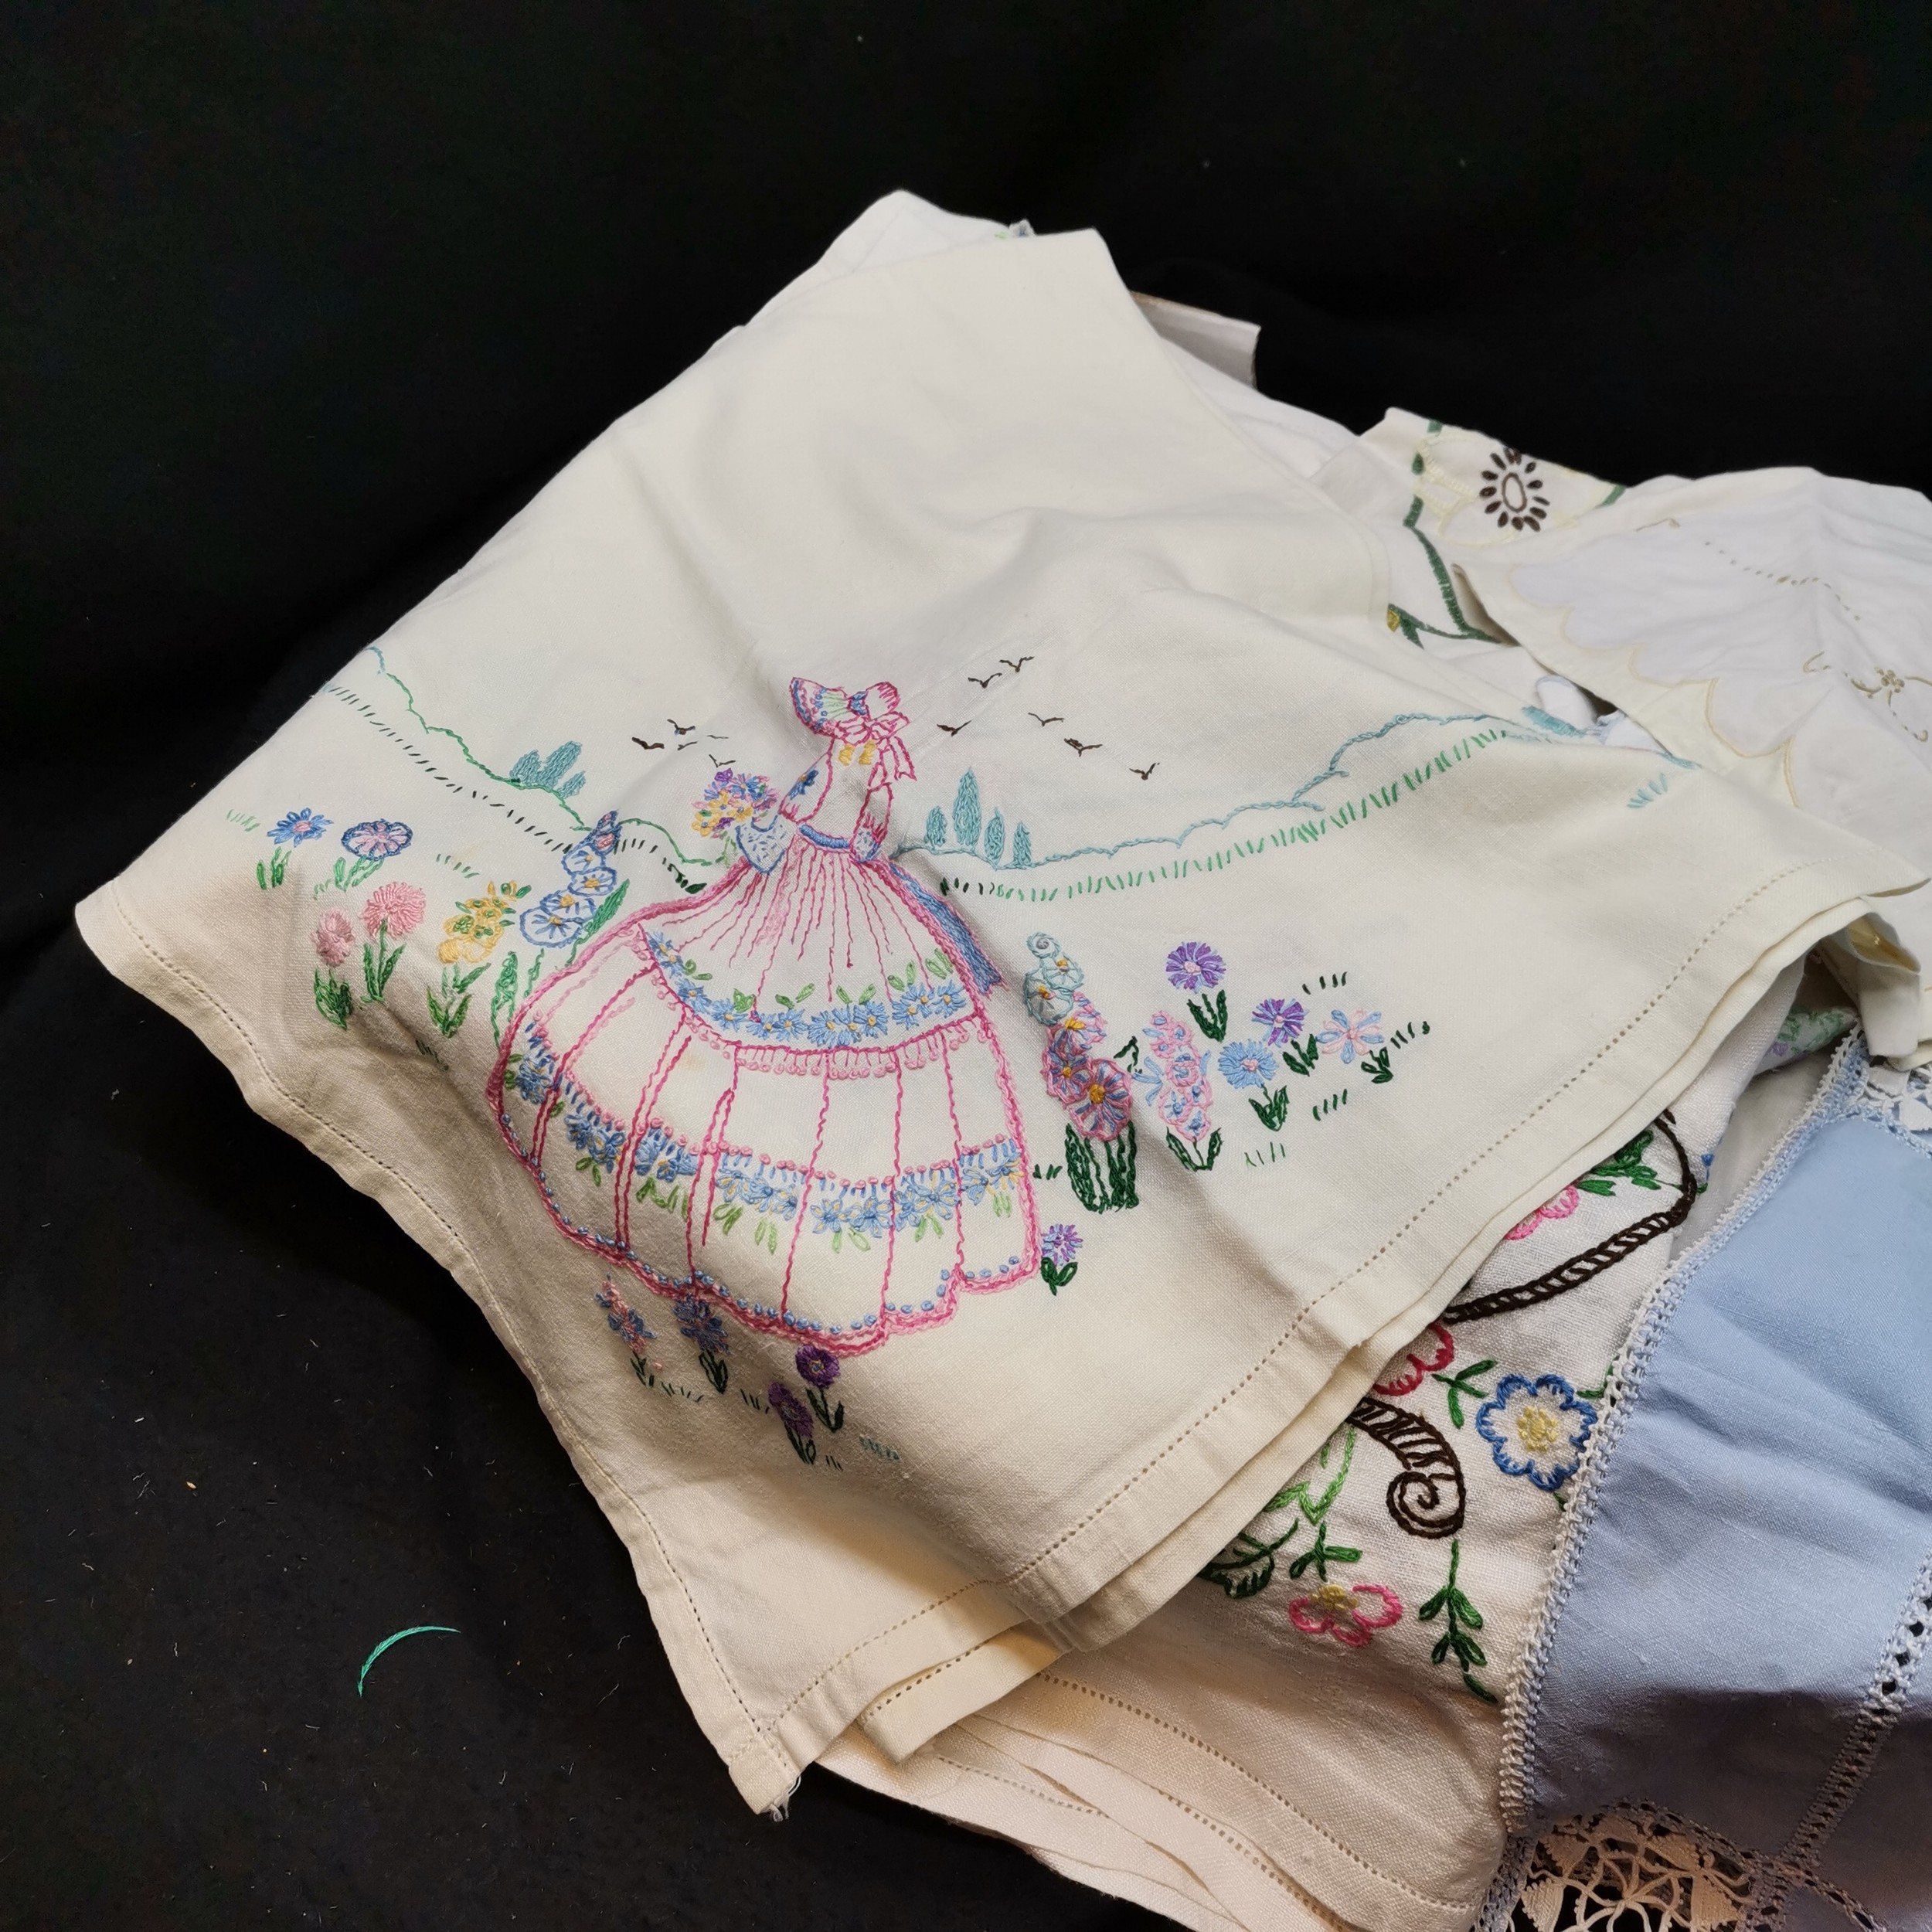 Lot of coloured linen, tablecloths, runners, etc - all in used condition - most with embroidery - Image 2 of 4